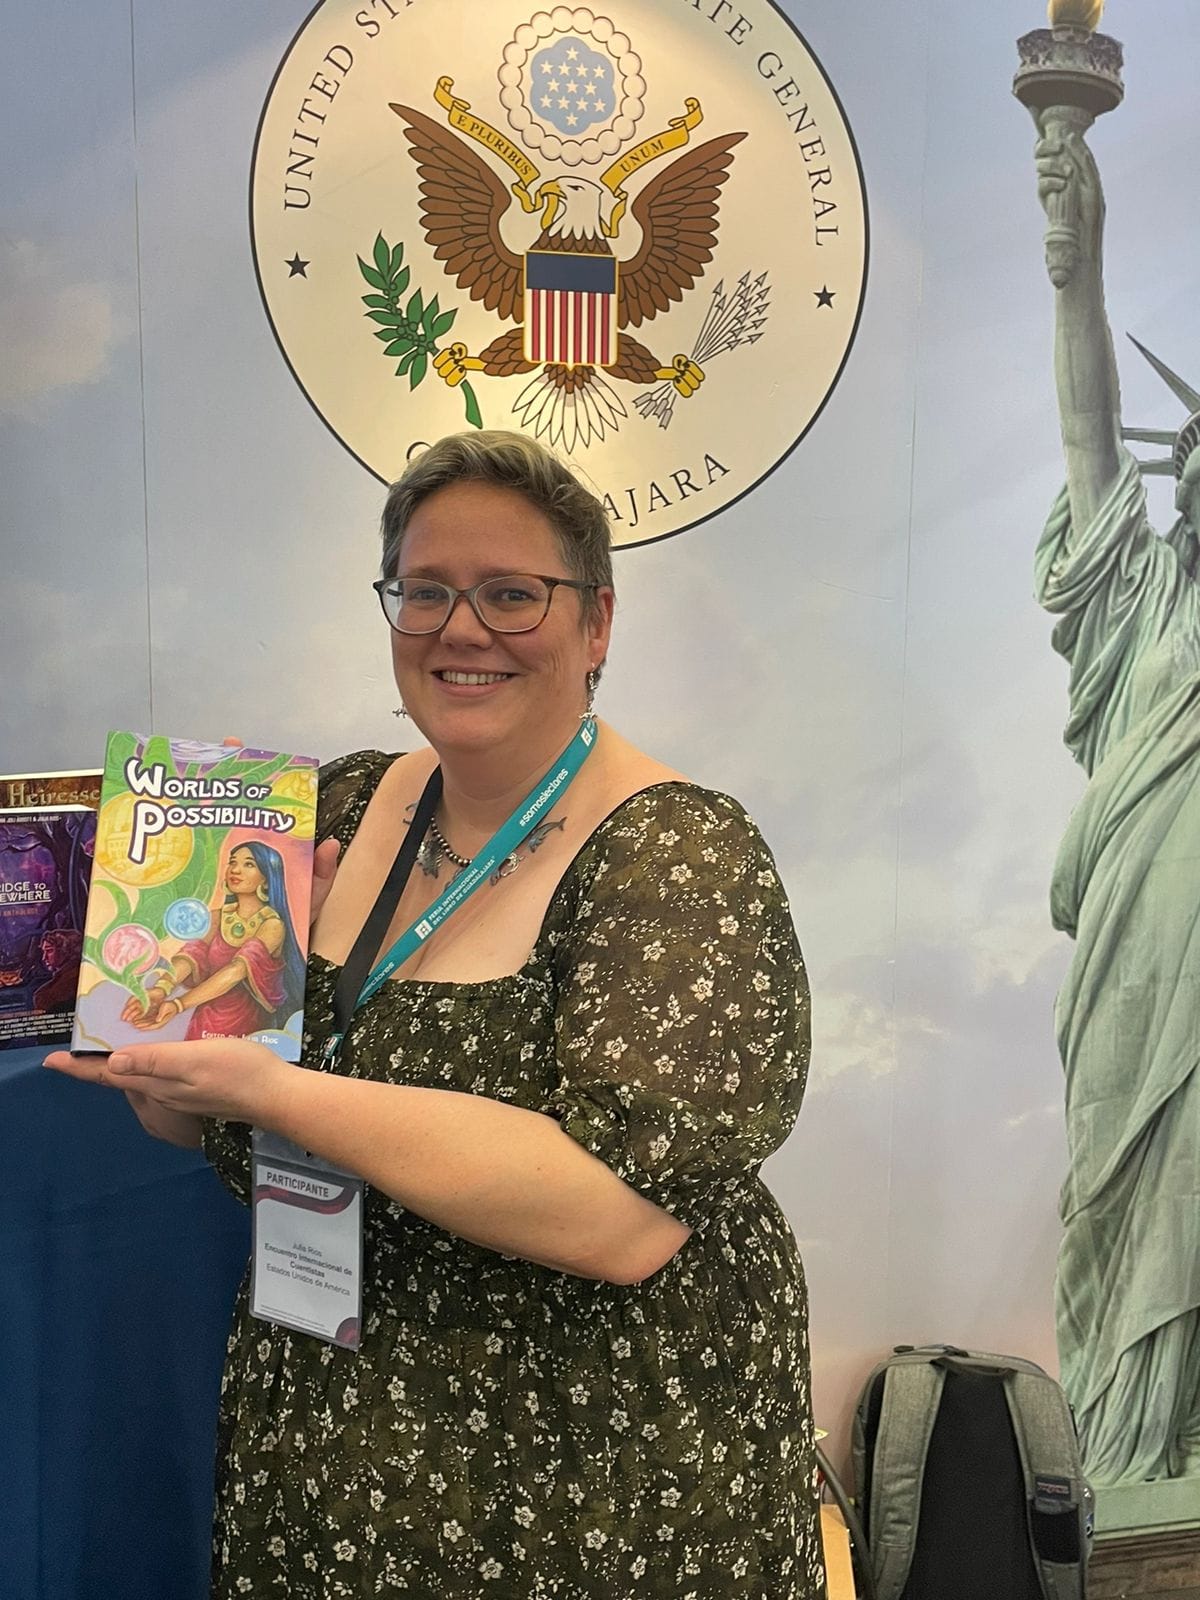 Julia Rios in in a floral dress, holding a copy of the hardcover edition of Worlds of Possibility. They are stanging in front of a backdrop with the seal of the United states and the Statue of Liberty.